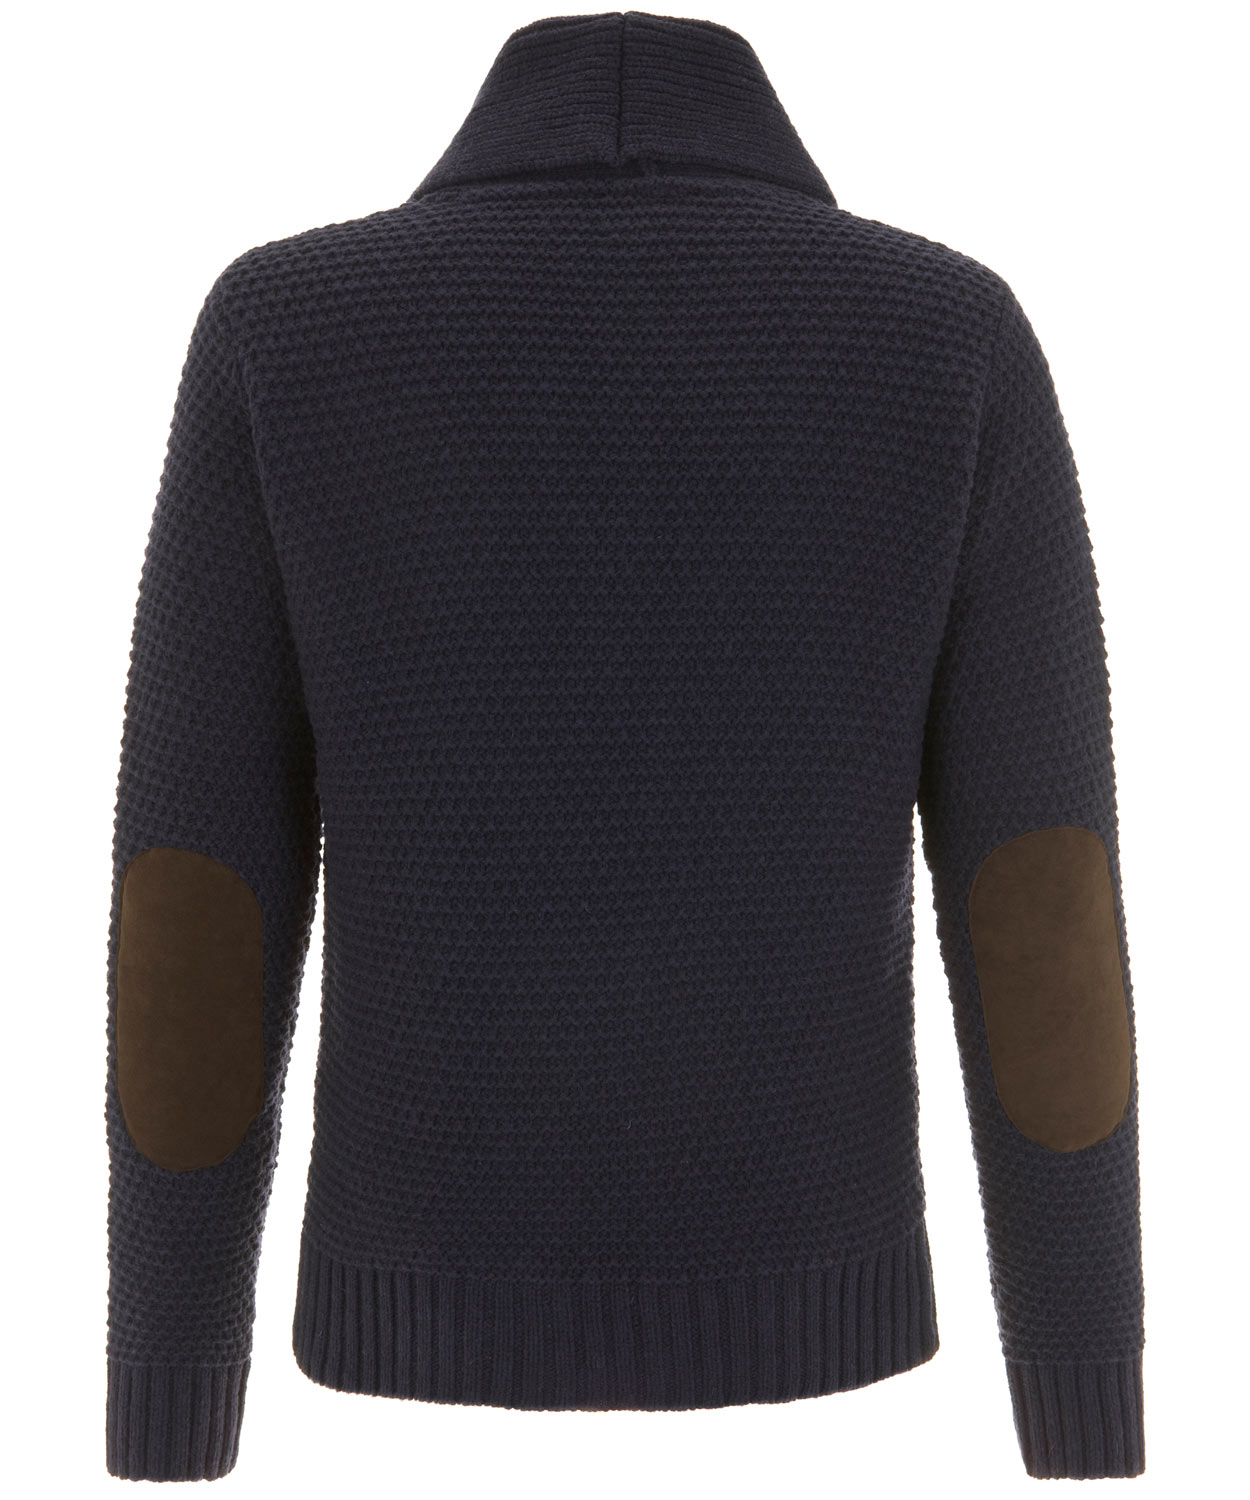 Lyst - Barbour Navy Baltic Shawl Cardigan in Blue for Men